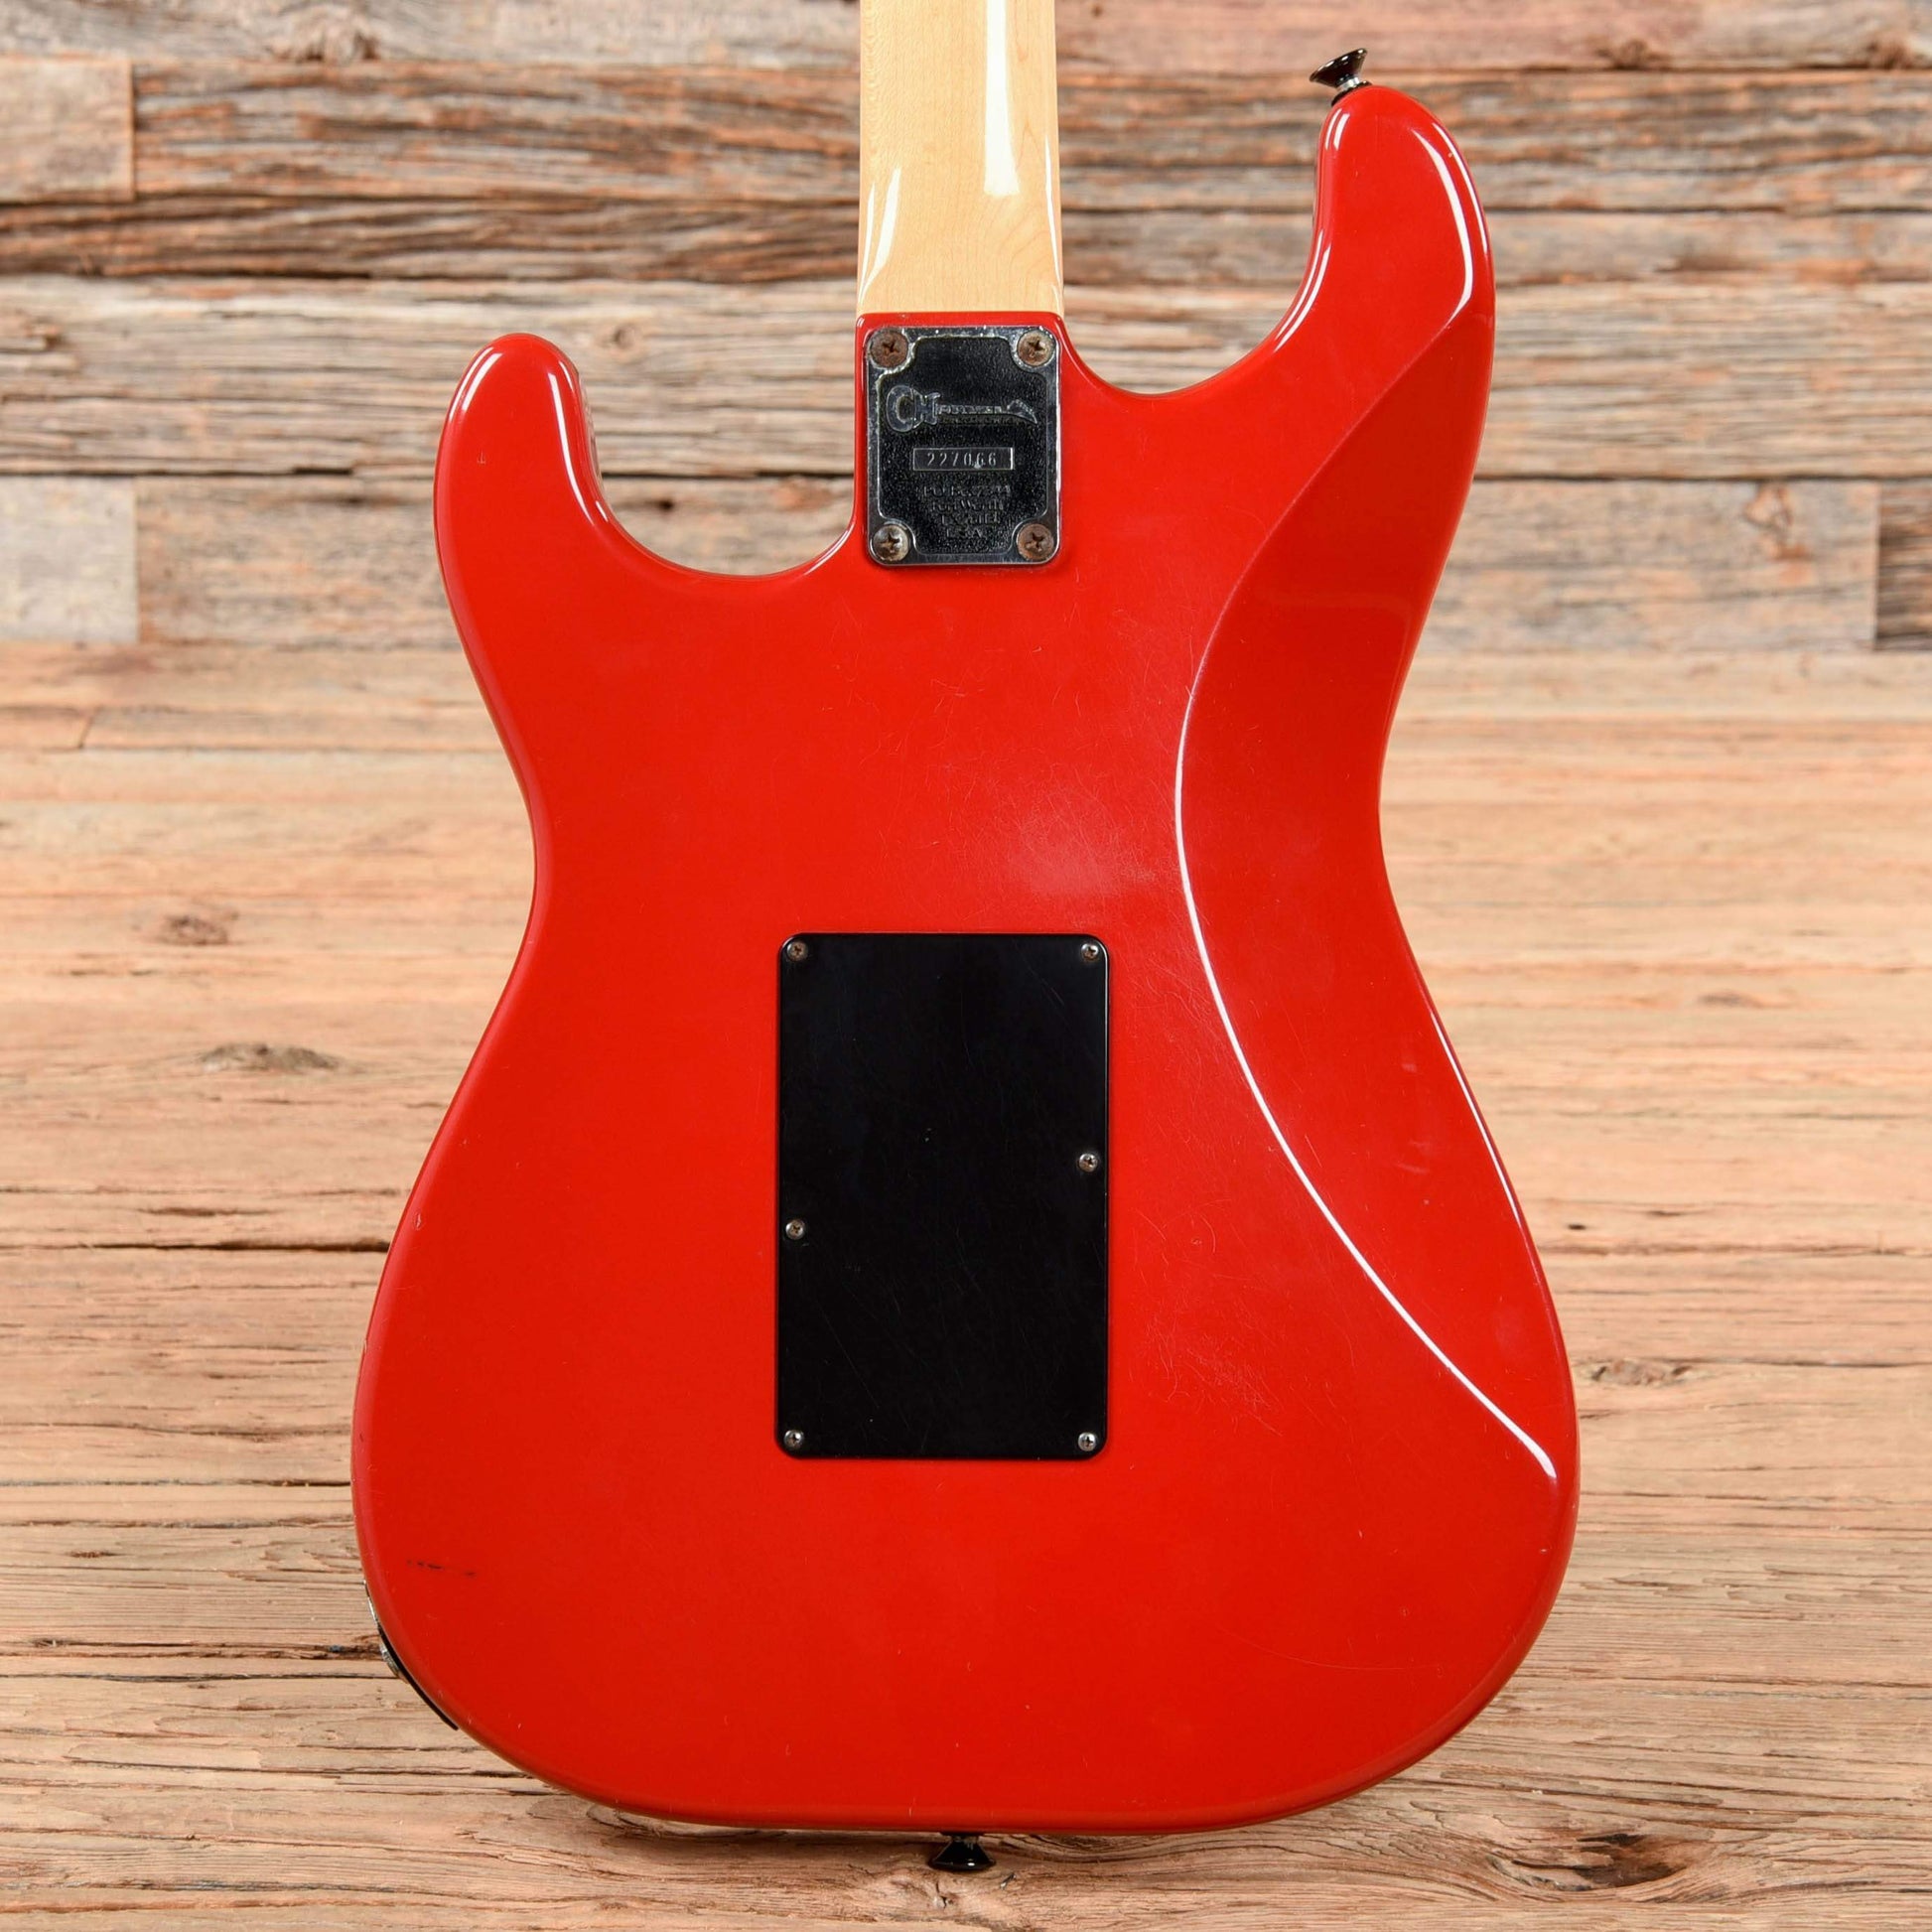 Charvel Model 1A Red 1986 Electric Guitars / Solid Body